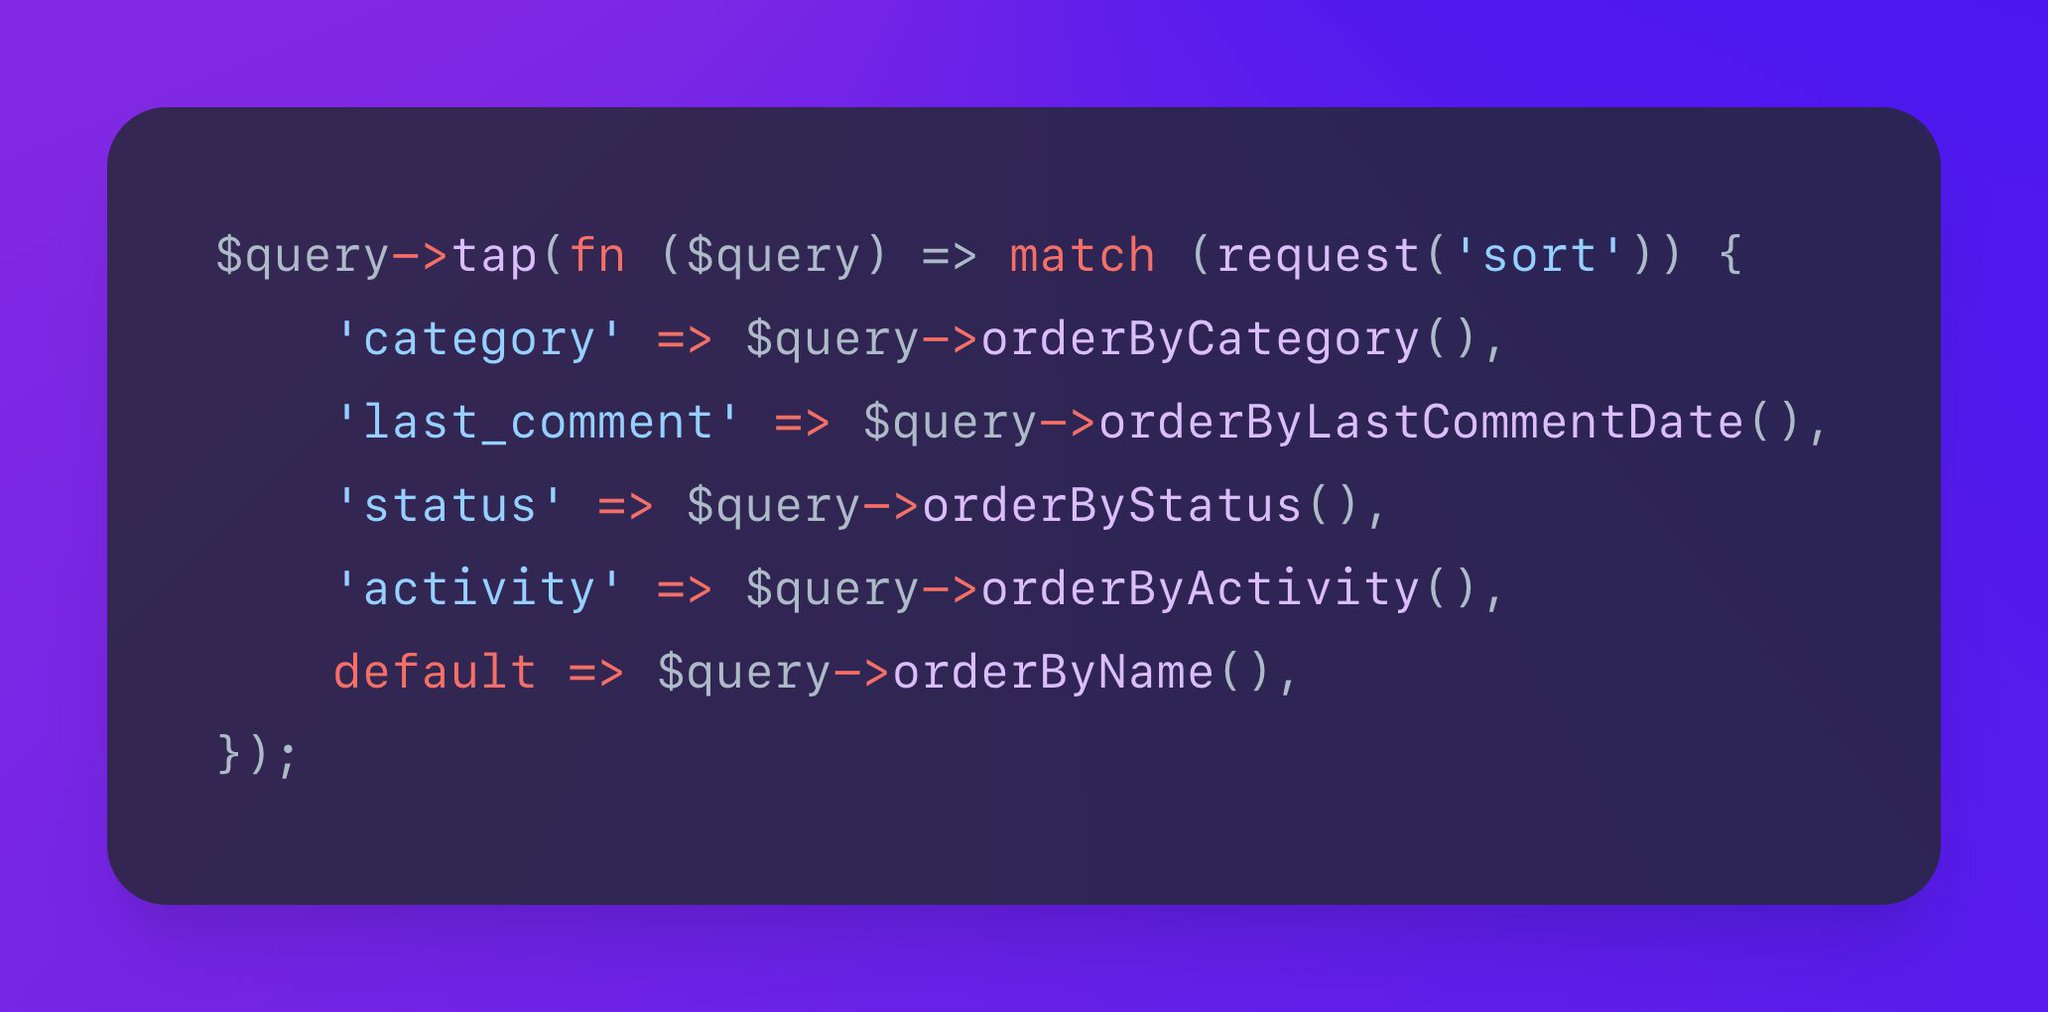 Use match () or switch () statements to conditionally scope database queries based on query strings in the request